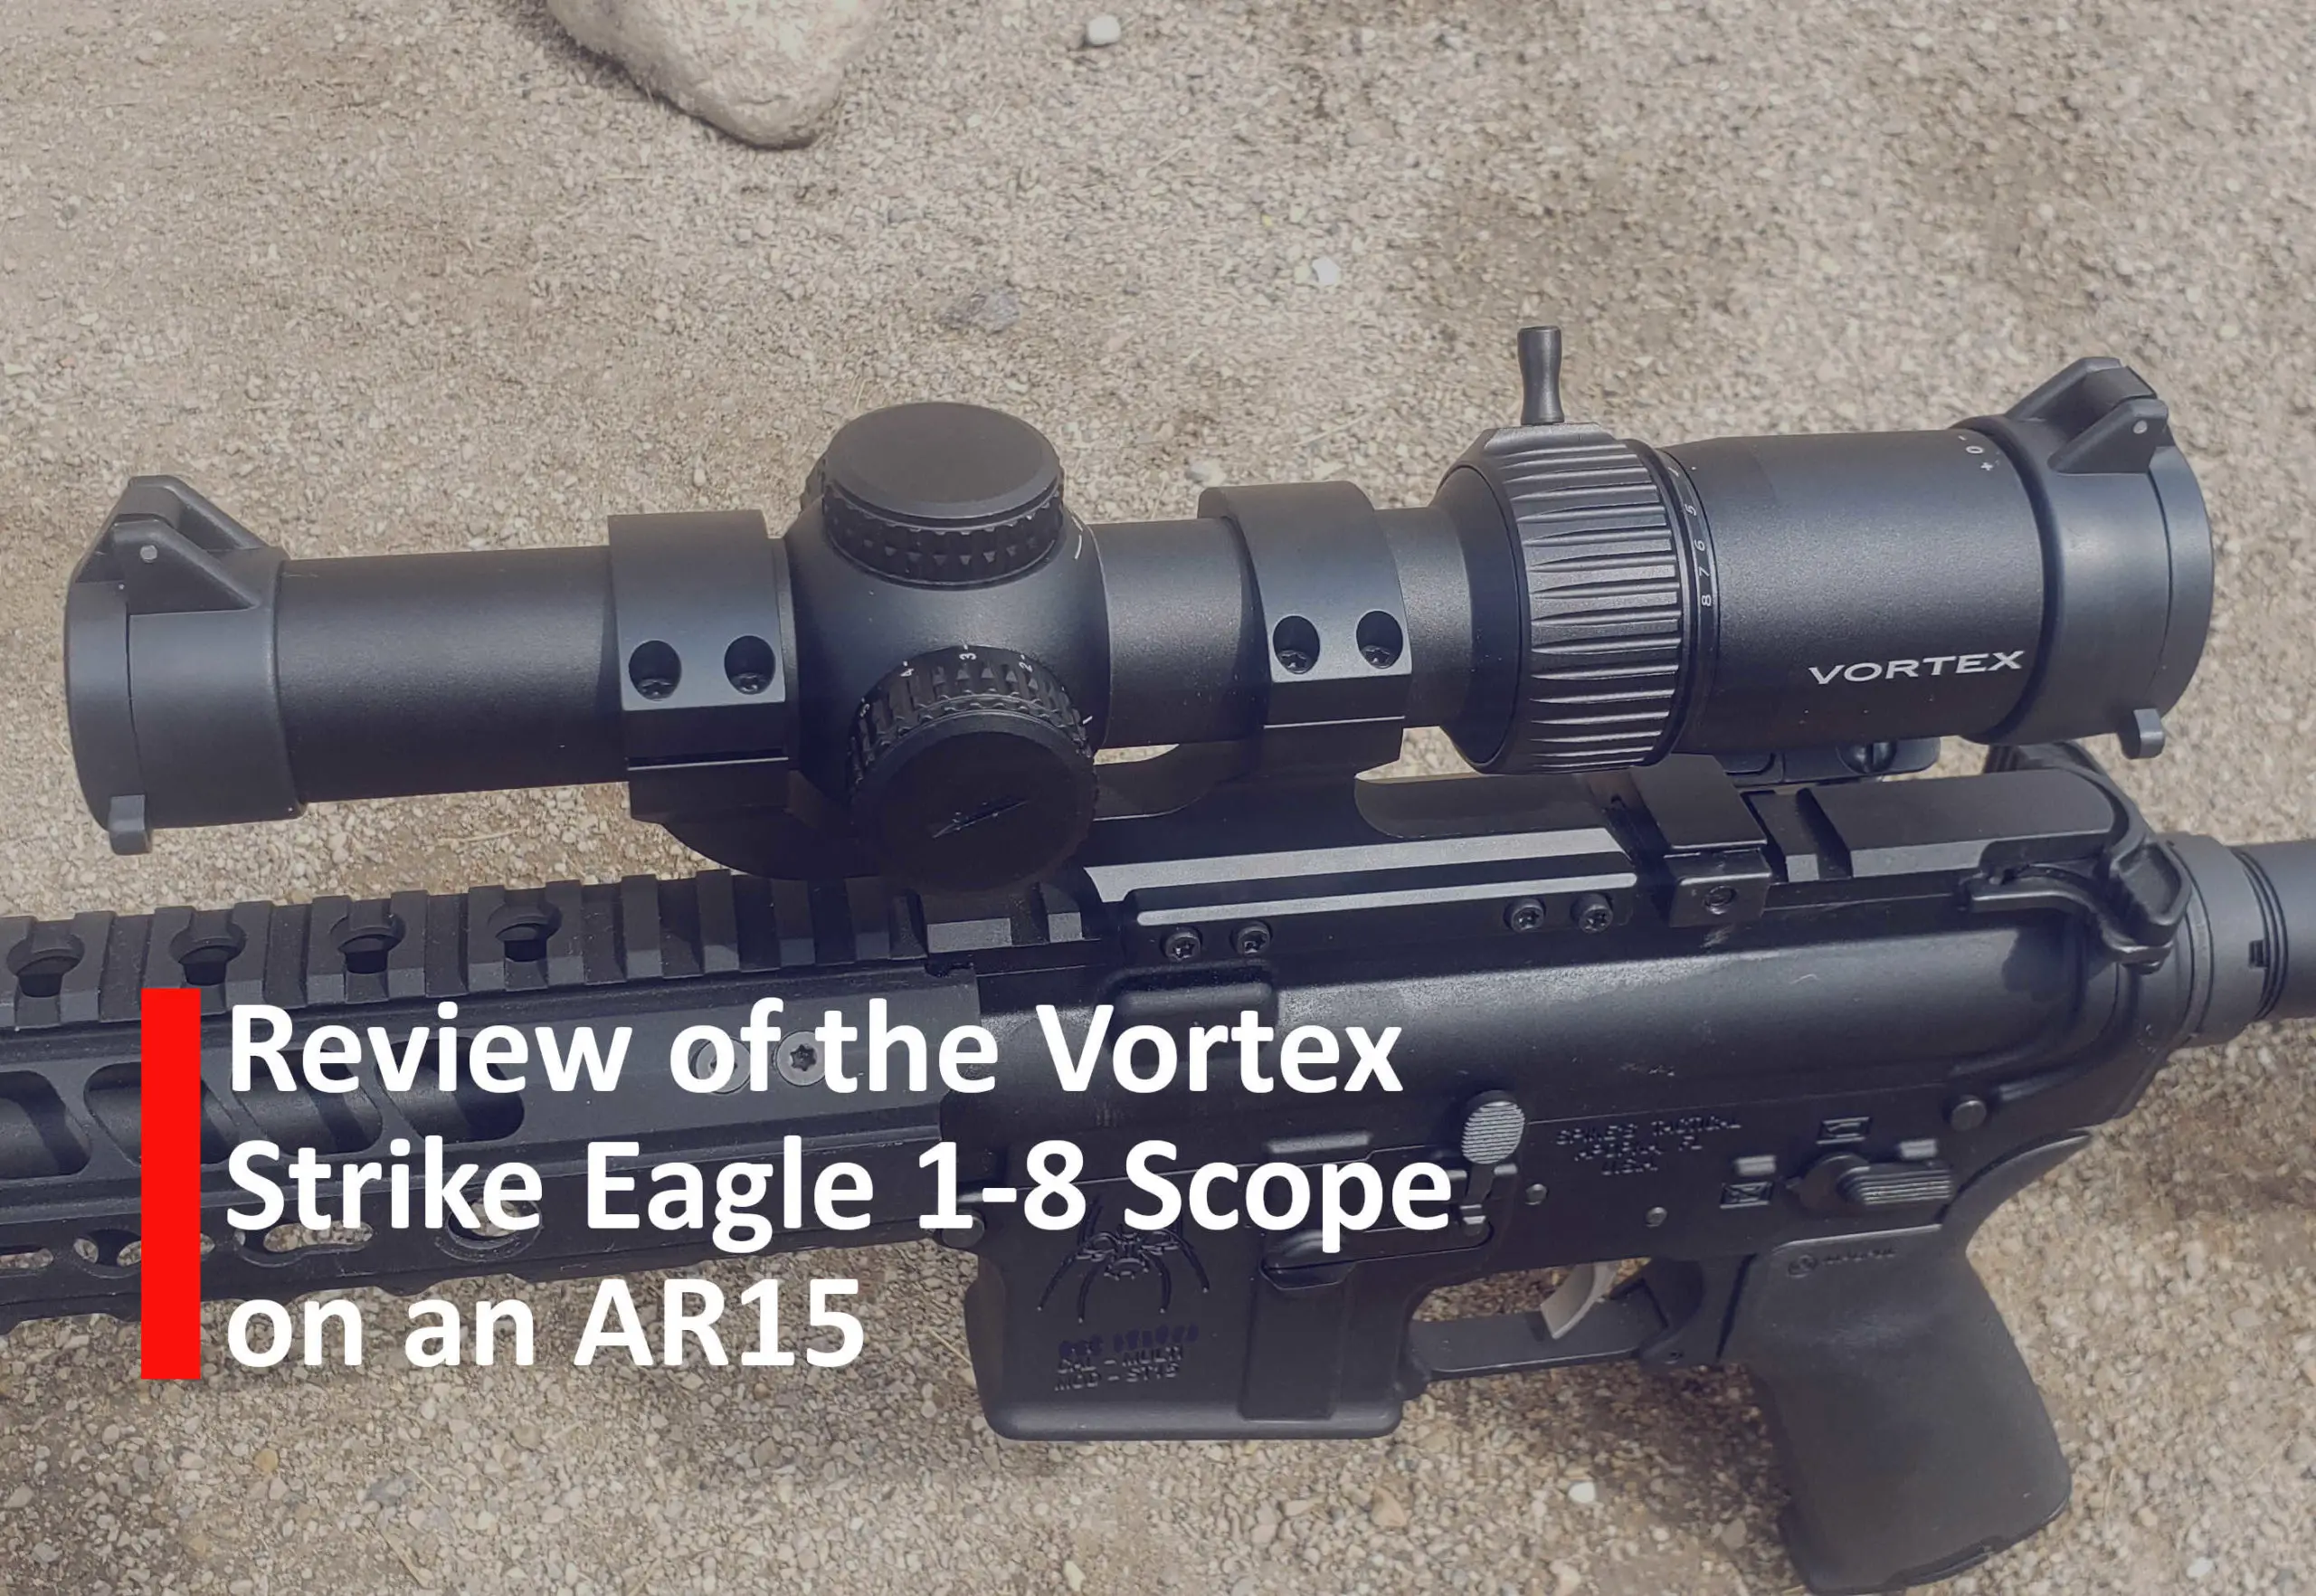 Review of the vortex strike eagle 1-8 scope on an AR15